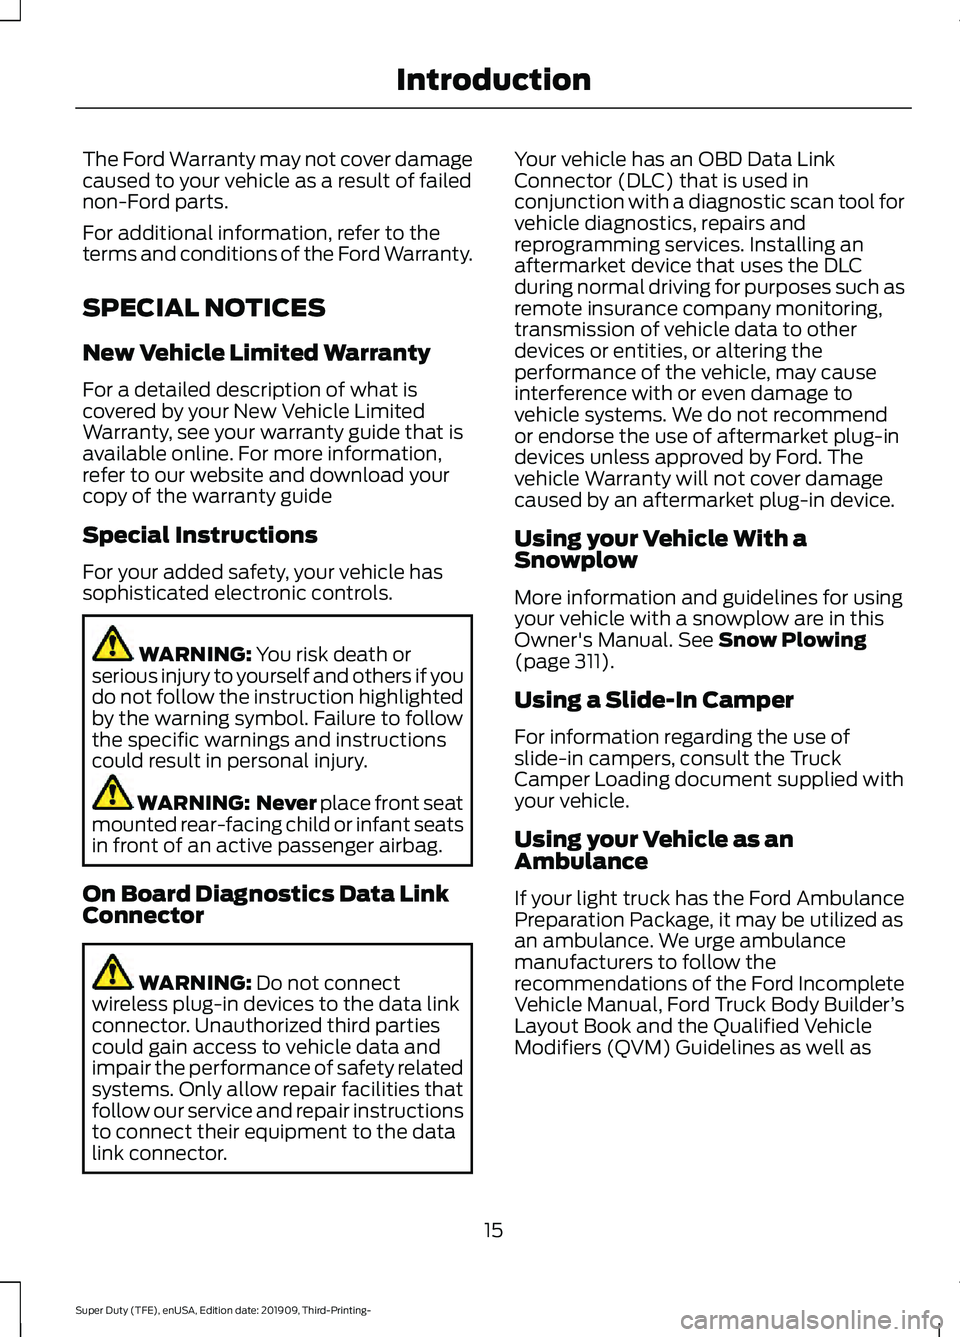 FORD F-550 2020 User Guide The Ford Warranty may not cover damage
caused to your vehicle as a result of failed
non-Ford parts.
For additional information, refer to the
terms and conditions of the Ford Warranty.
SPECIAL NOTICES
